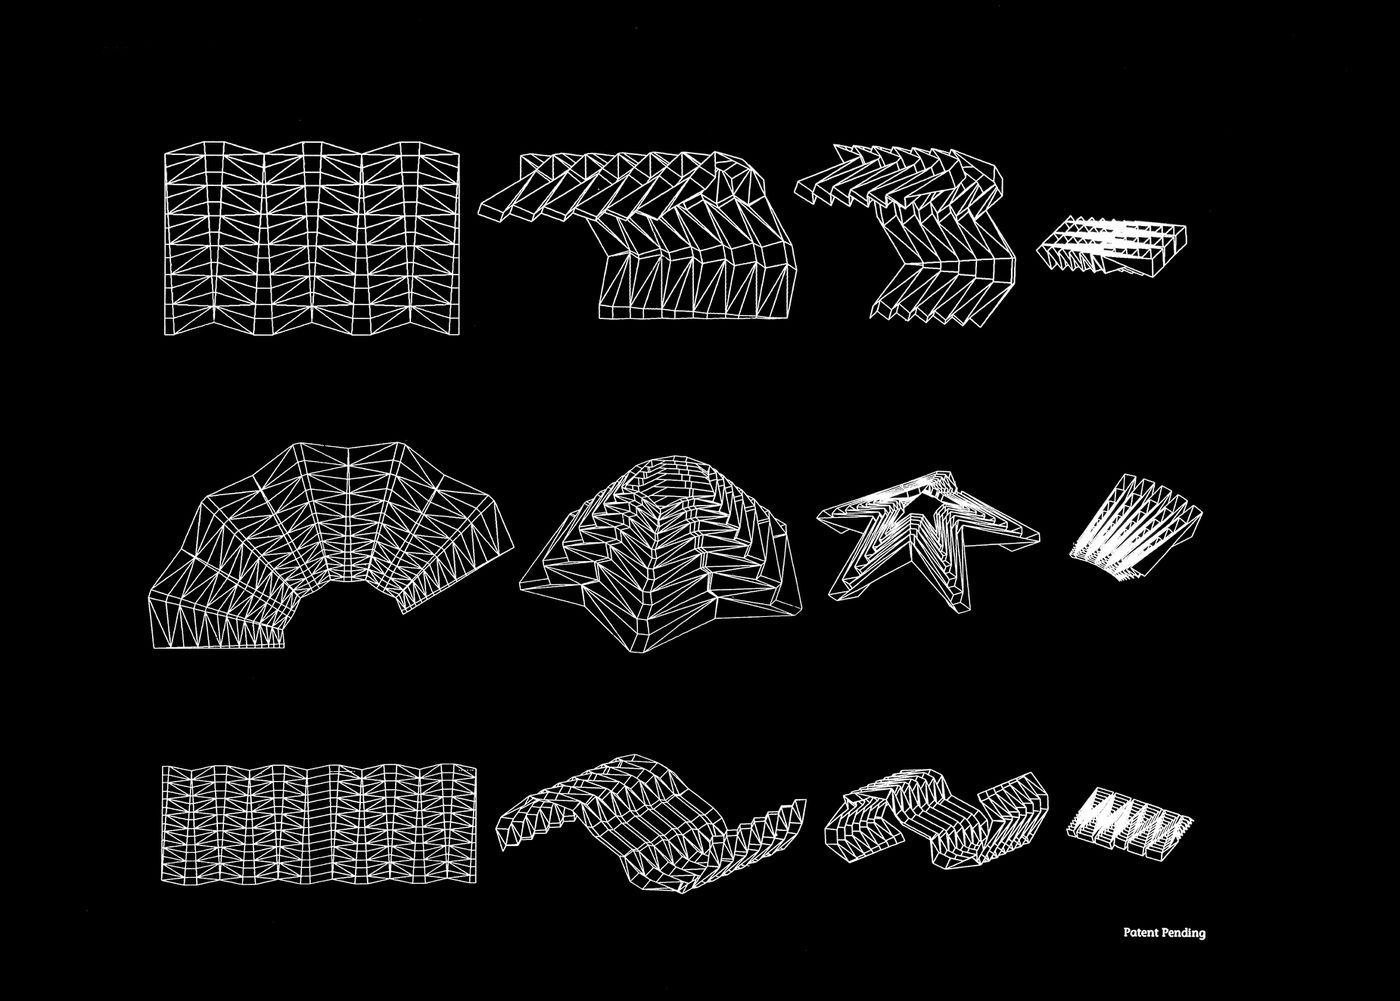 Examples of reversibly expandable structures based on foldable units